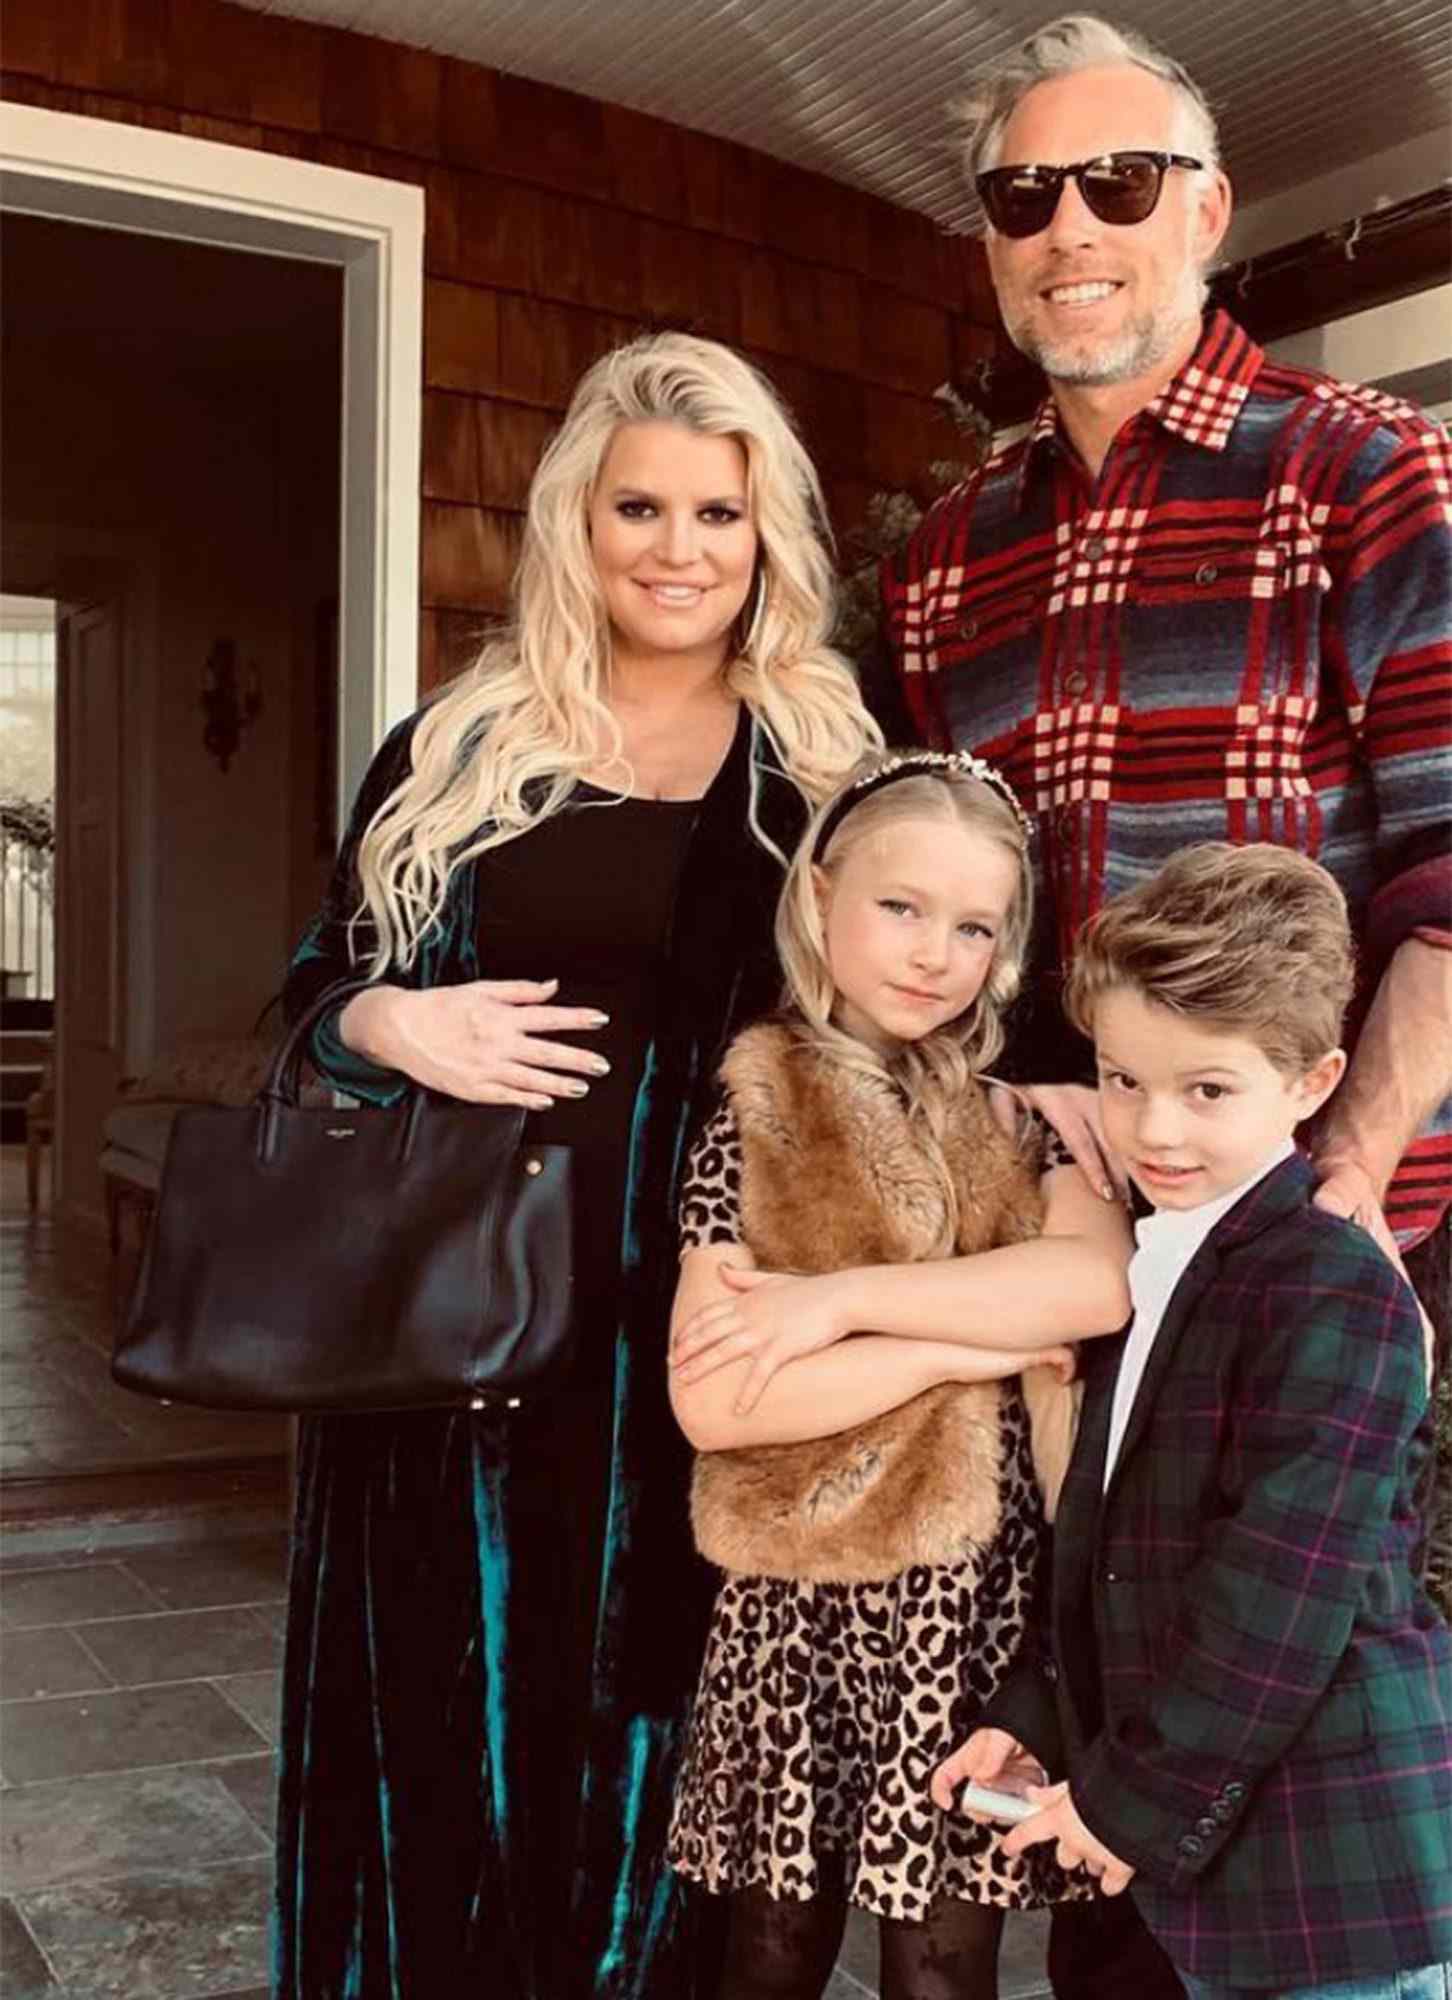 Jessica Simpson's Daughter on the Way's Name Is Birdie: Source | PEOPLE.com